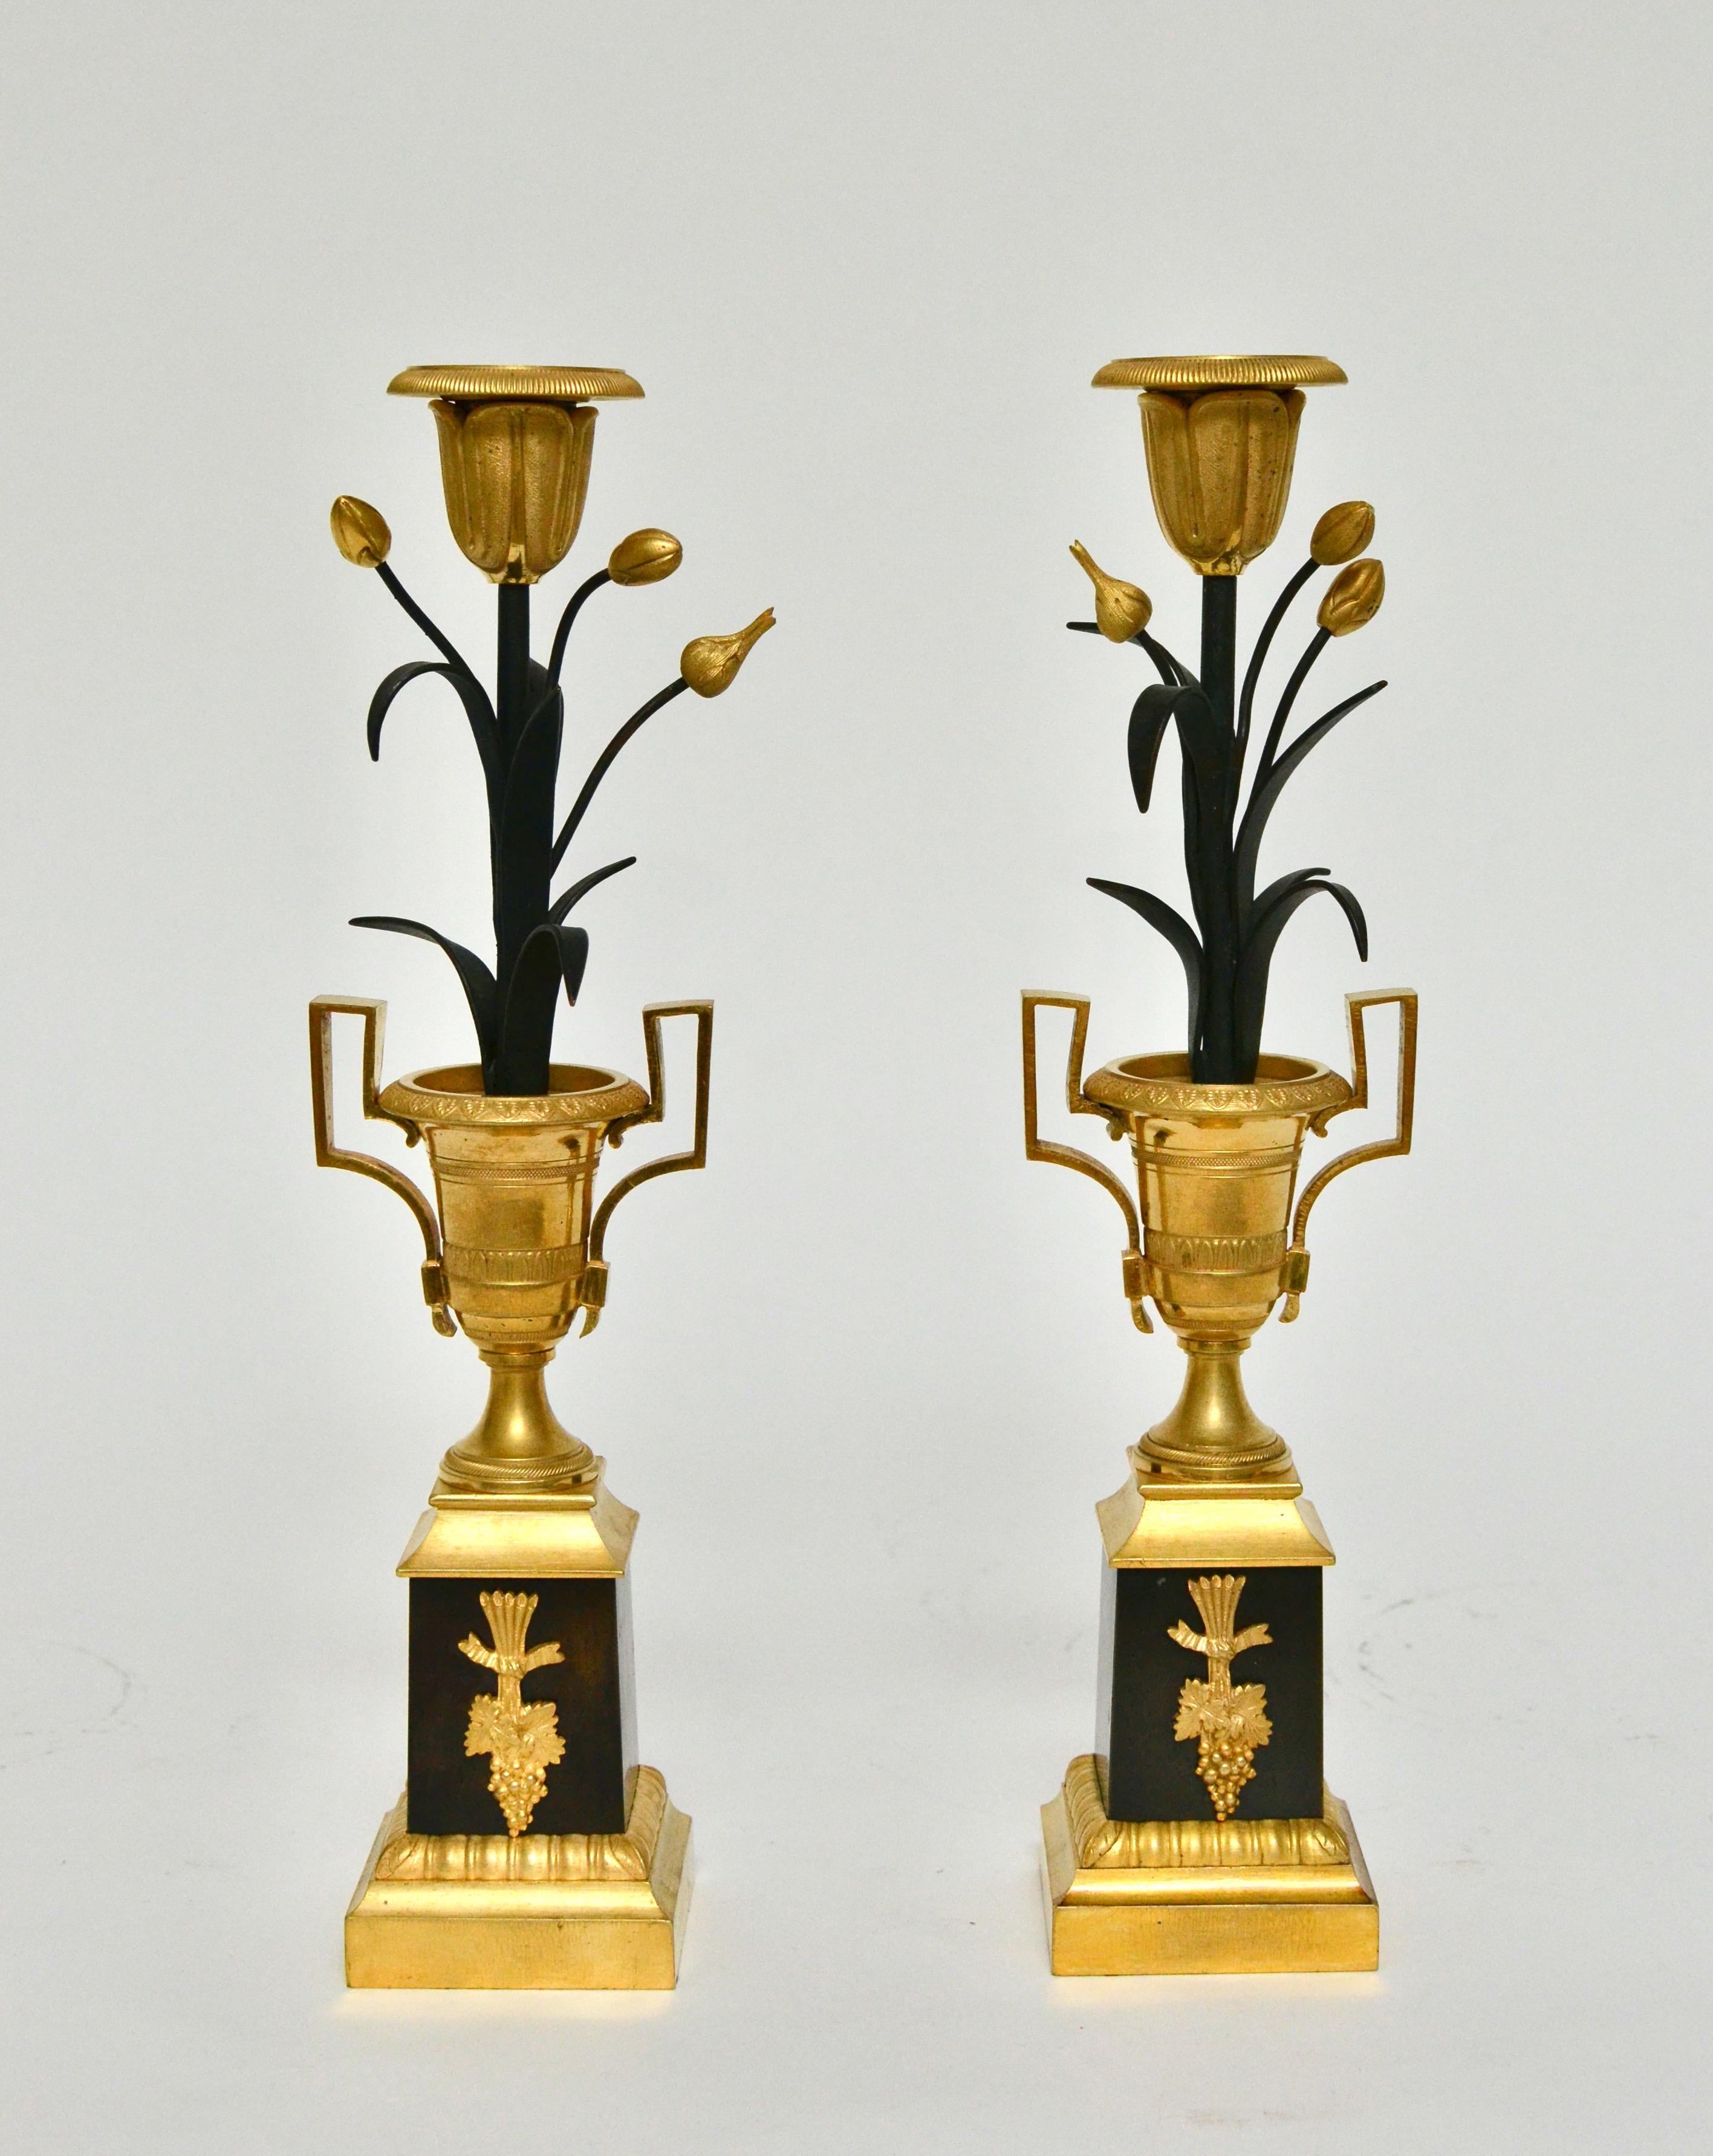 A 19th century French pair of gilt and patinated candlesticks. A very unusual model. Very fine detailing to the chasing of the bronze and the candlesticks are in a very nice condition. 